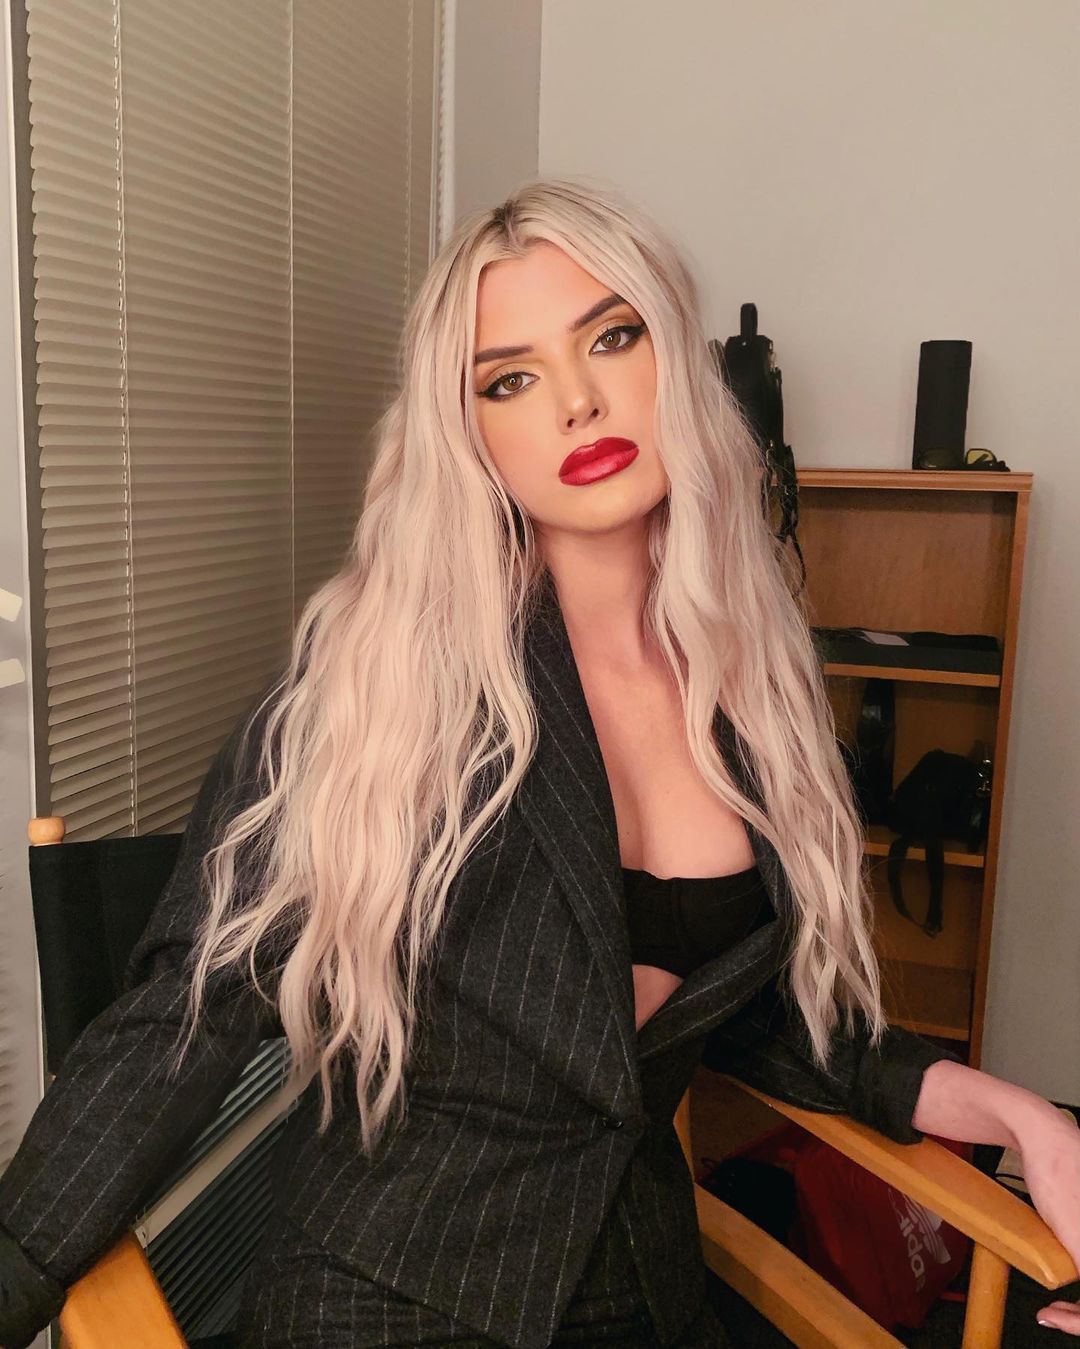 Alissa Violet Biography, Wiki, Net Worth, Boyfriend, Career, Success Story, Career, Age, Education, Personal Life, and Body Measurements